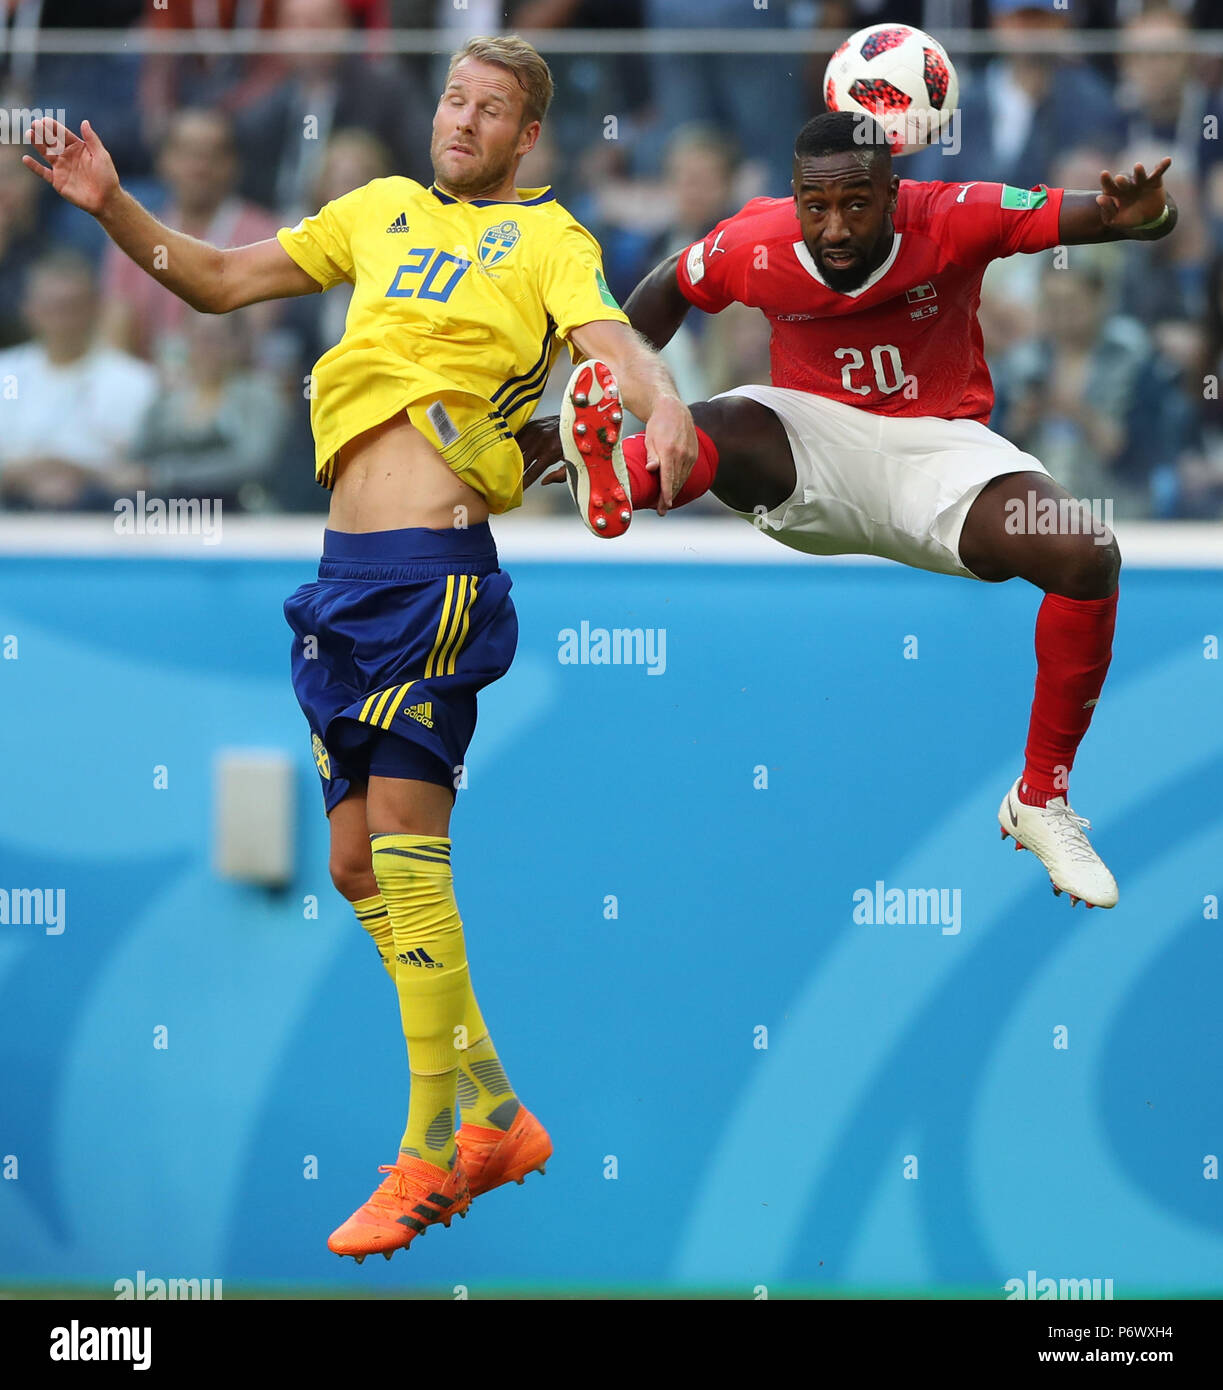 Saint Petersburg, Russia. 3rd July, 2018. Johan Djourou (R) of Switzerland vies with Ola Toivonen of Sweden during the 2018 FIFA World Cup round of 16 match between Switzerland and Sweden in Saint Petersburg, Russia, July 3, 2018. Sweden won 1-0 and advanced to the quarter-final. Credit: Wu Zhuang/Xinhua/Alamy Live News Stock Photo